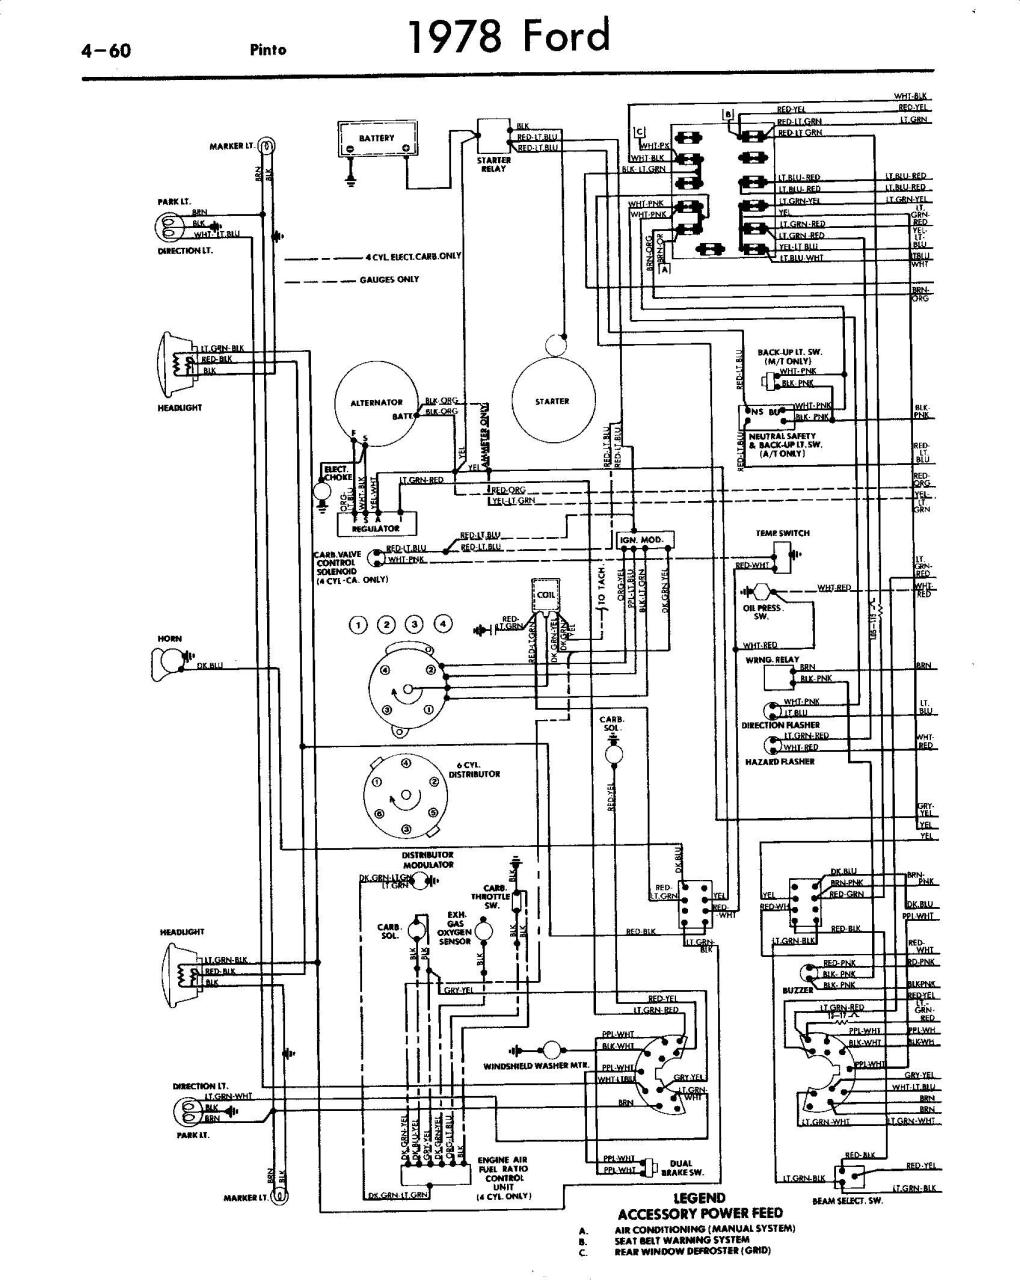 Wiring Diagram For 1978 Ford F250 Complete Wiring Schemas